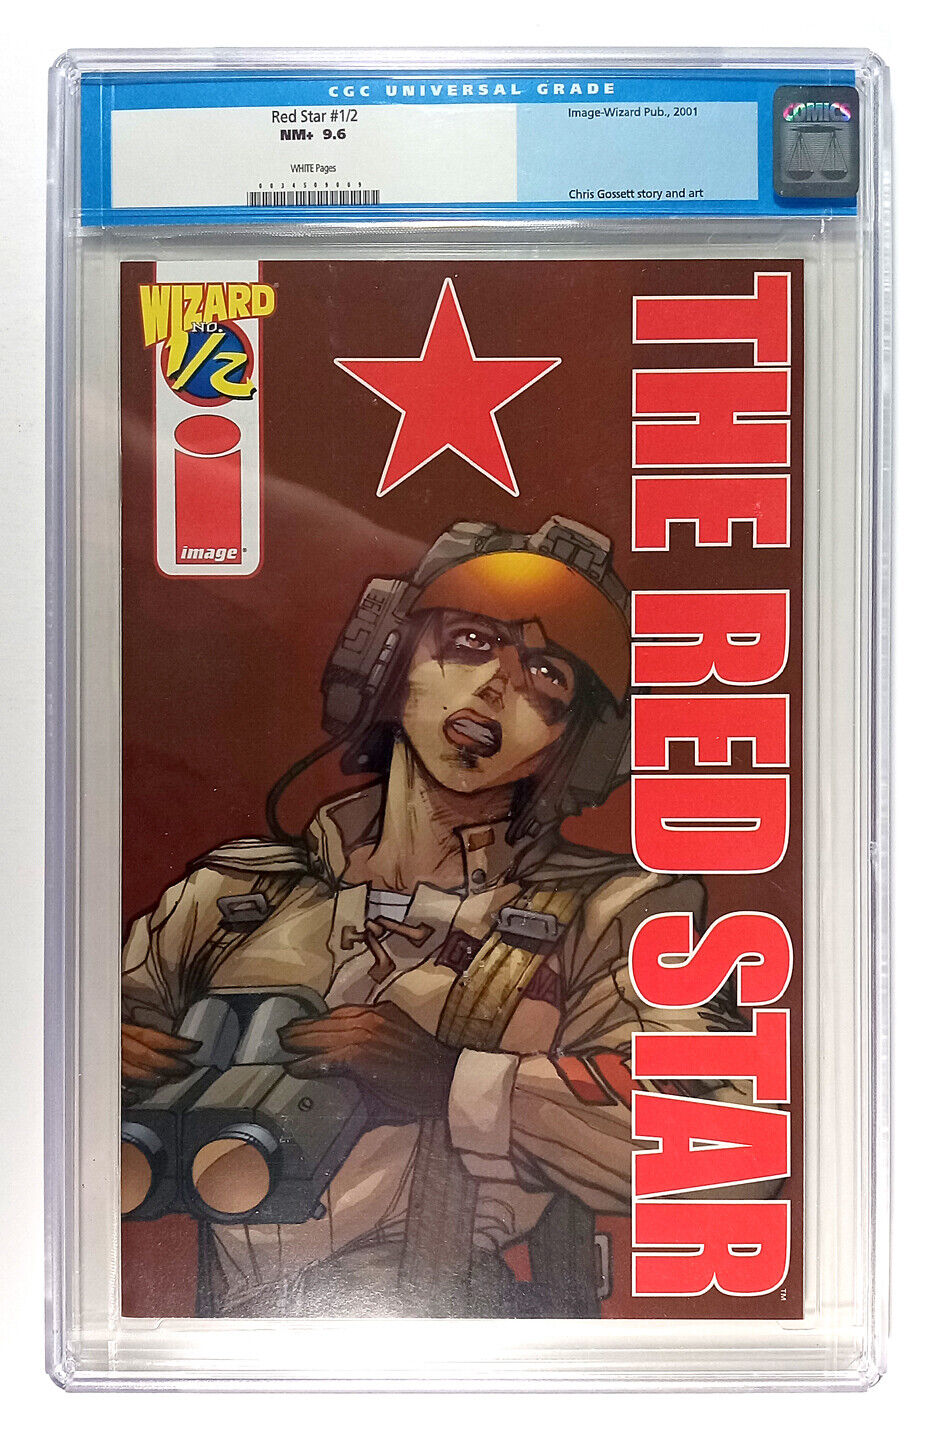 Red Star Wizard 1/2 #1A  CGC 9.6 White Pages  (2001)  Image/Wizard